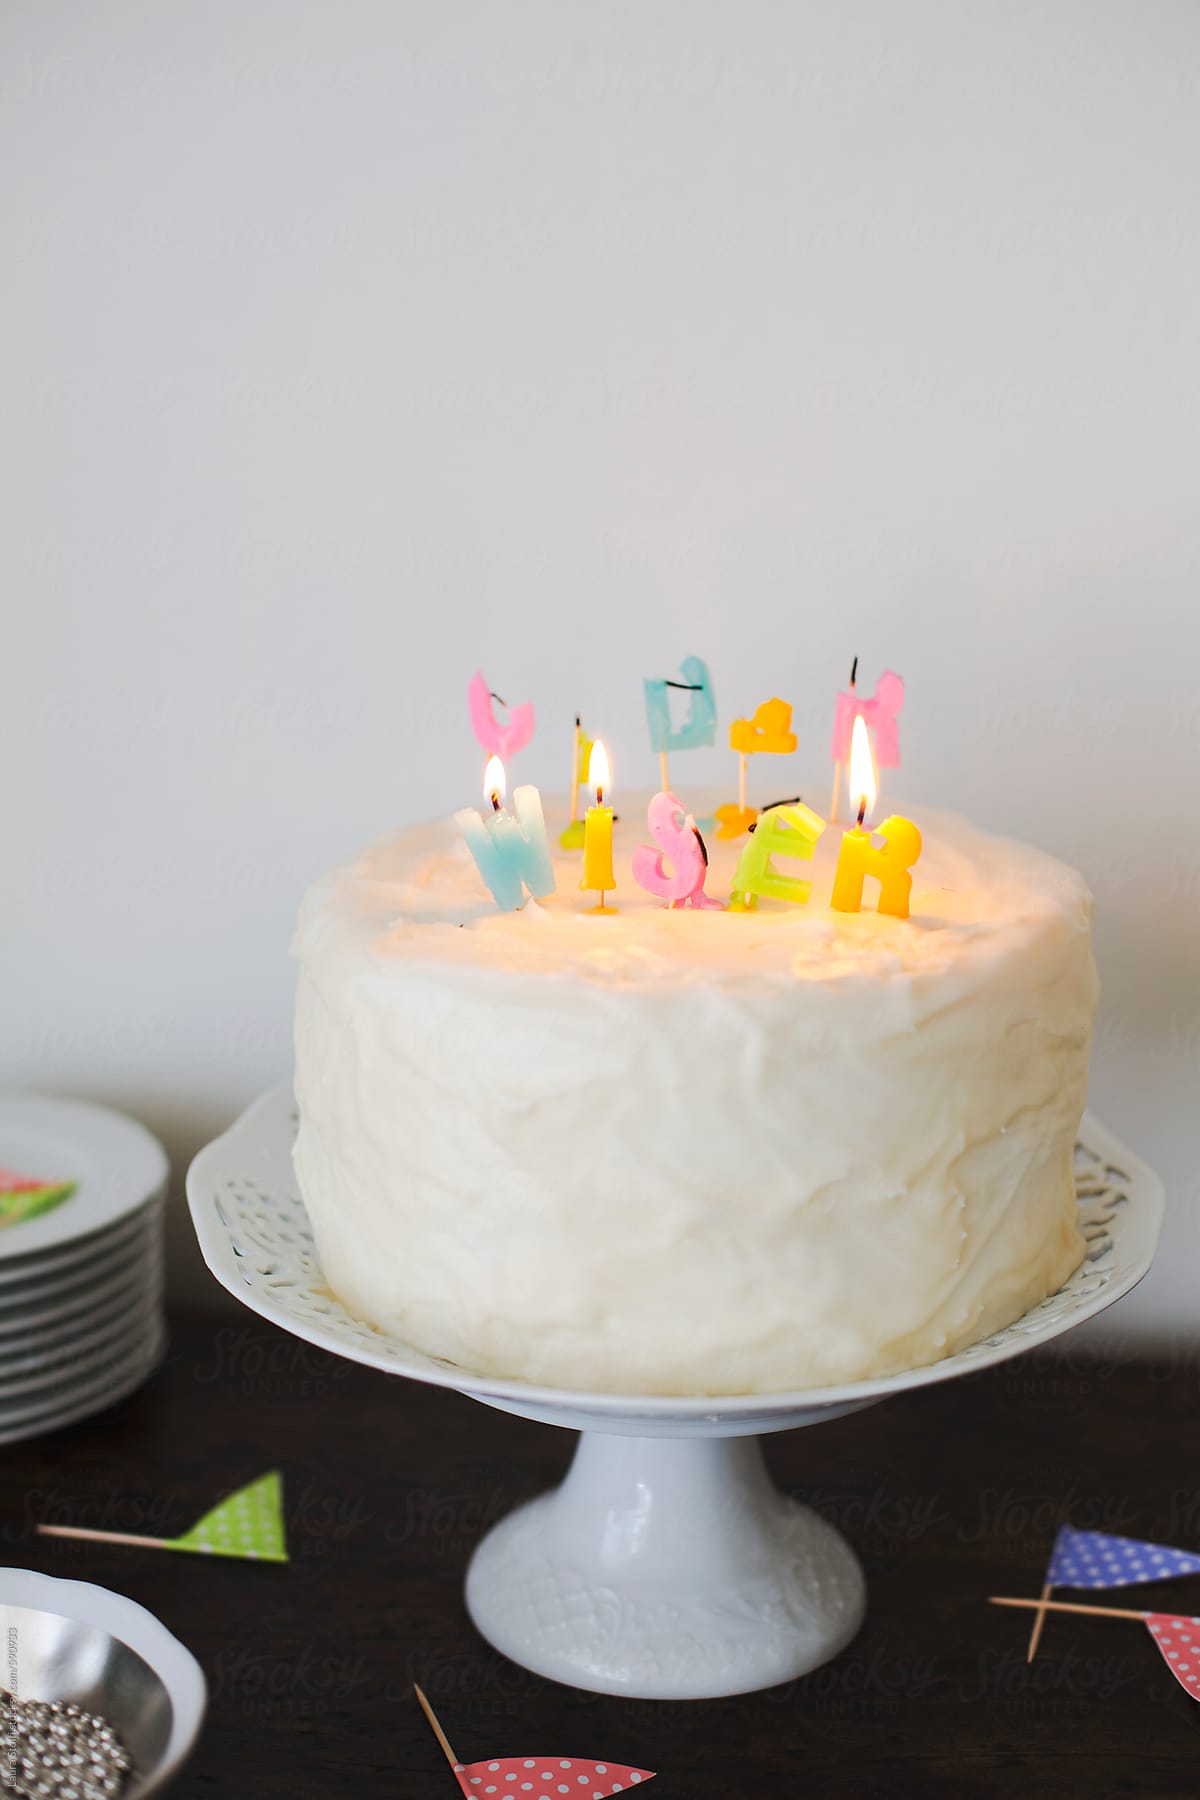 Melted candles on birtheday cake